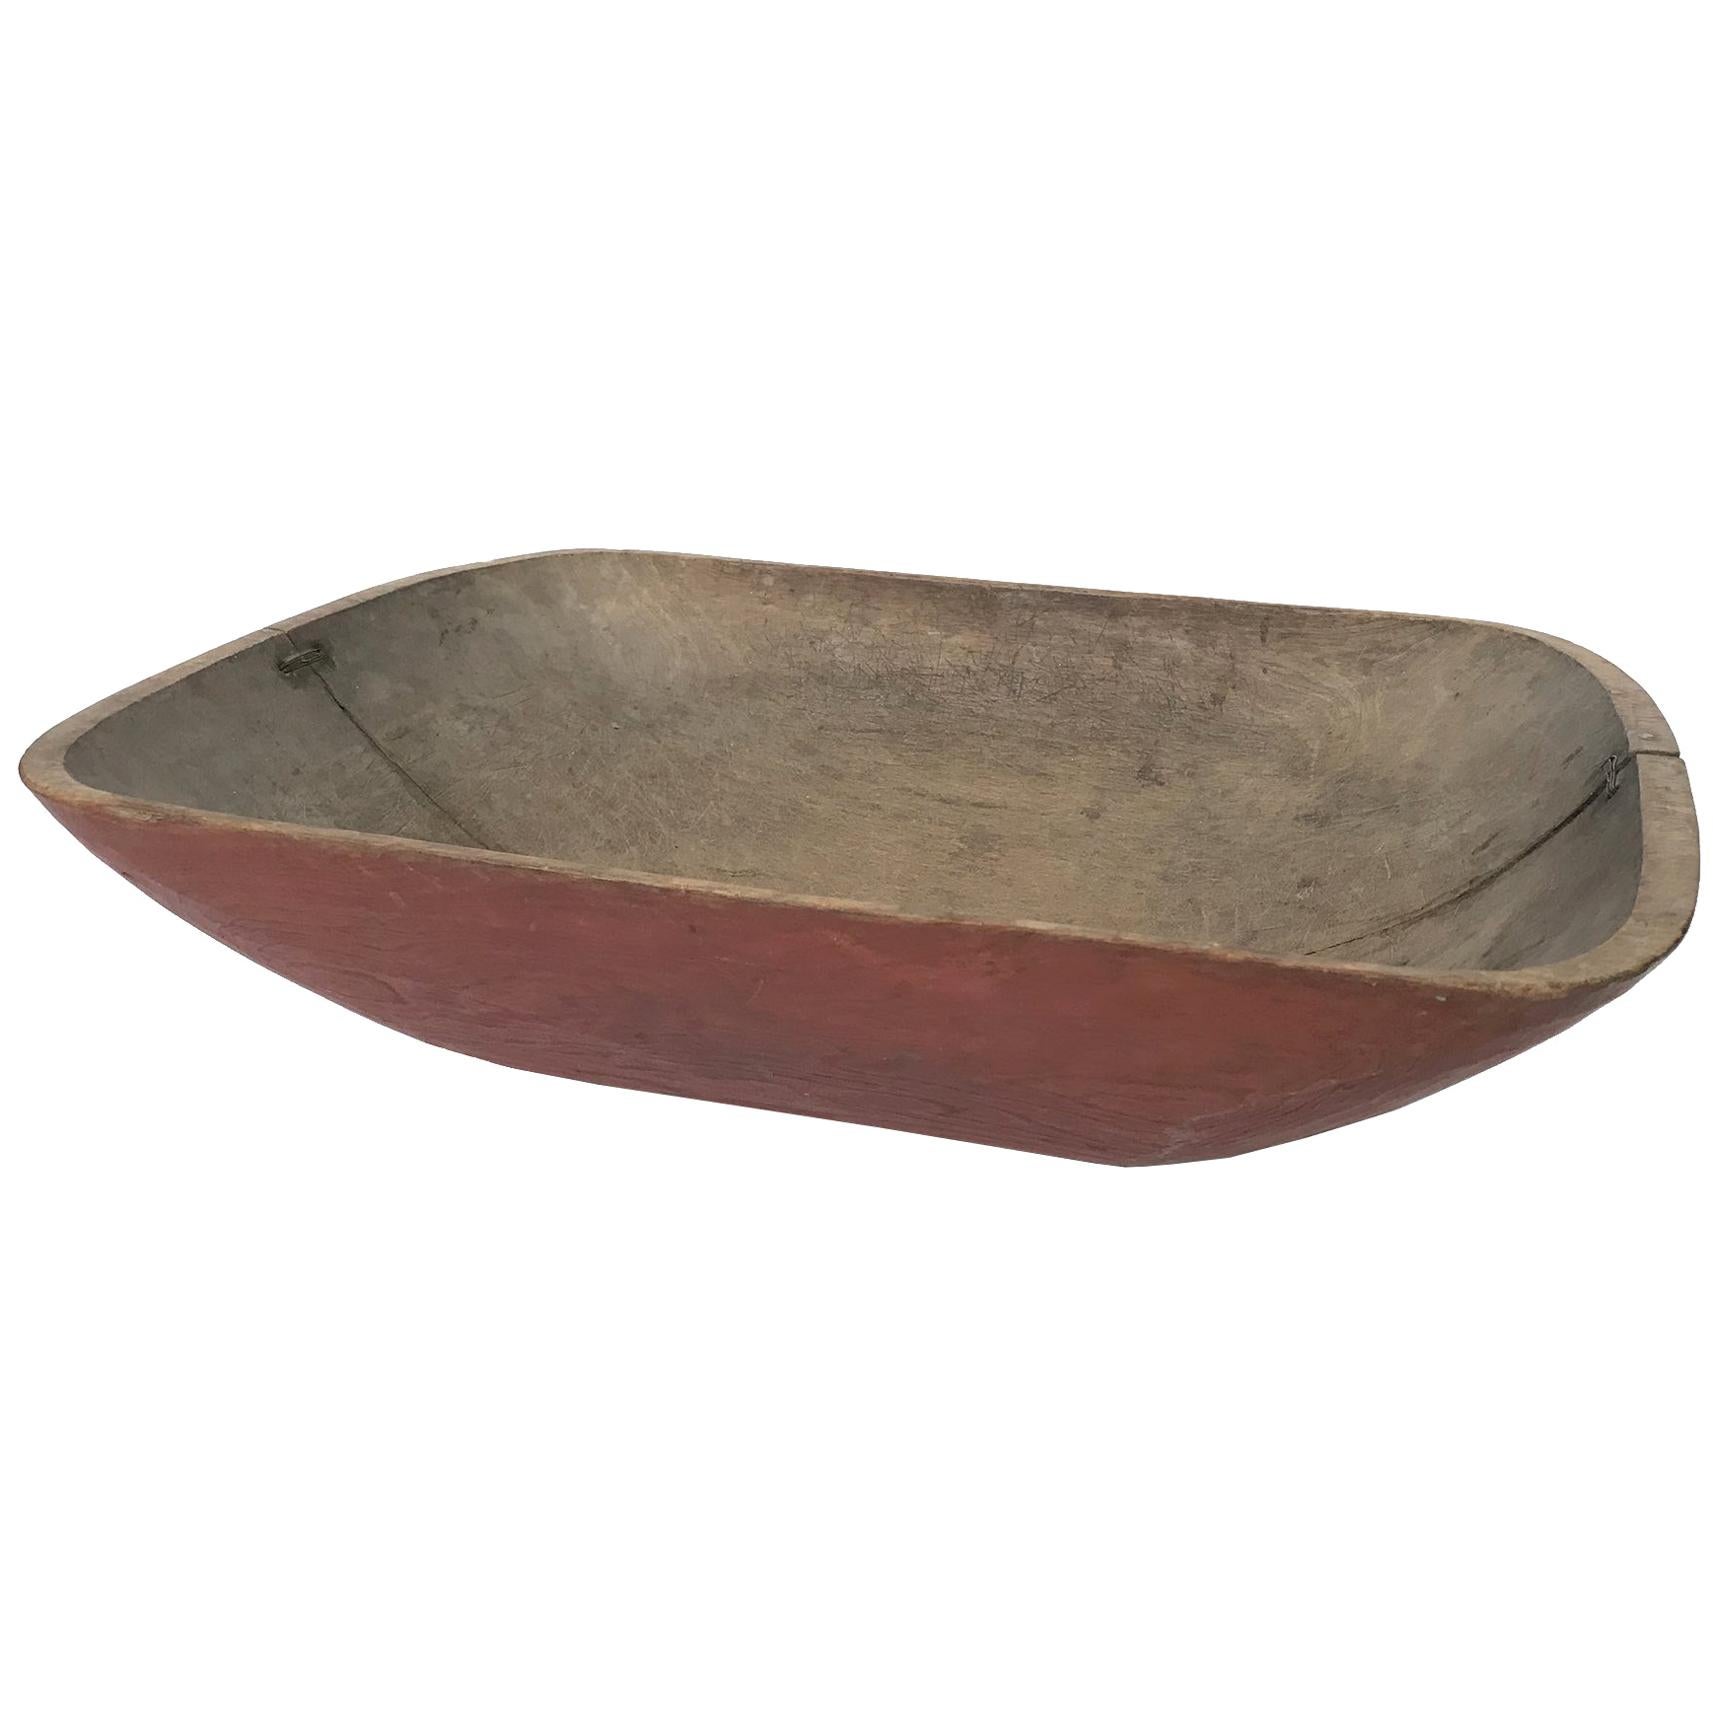 19th Century Red Wooden Bowl